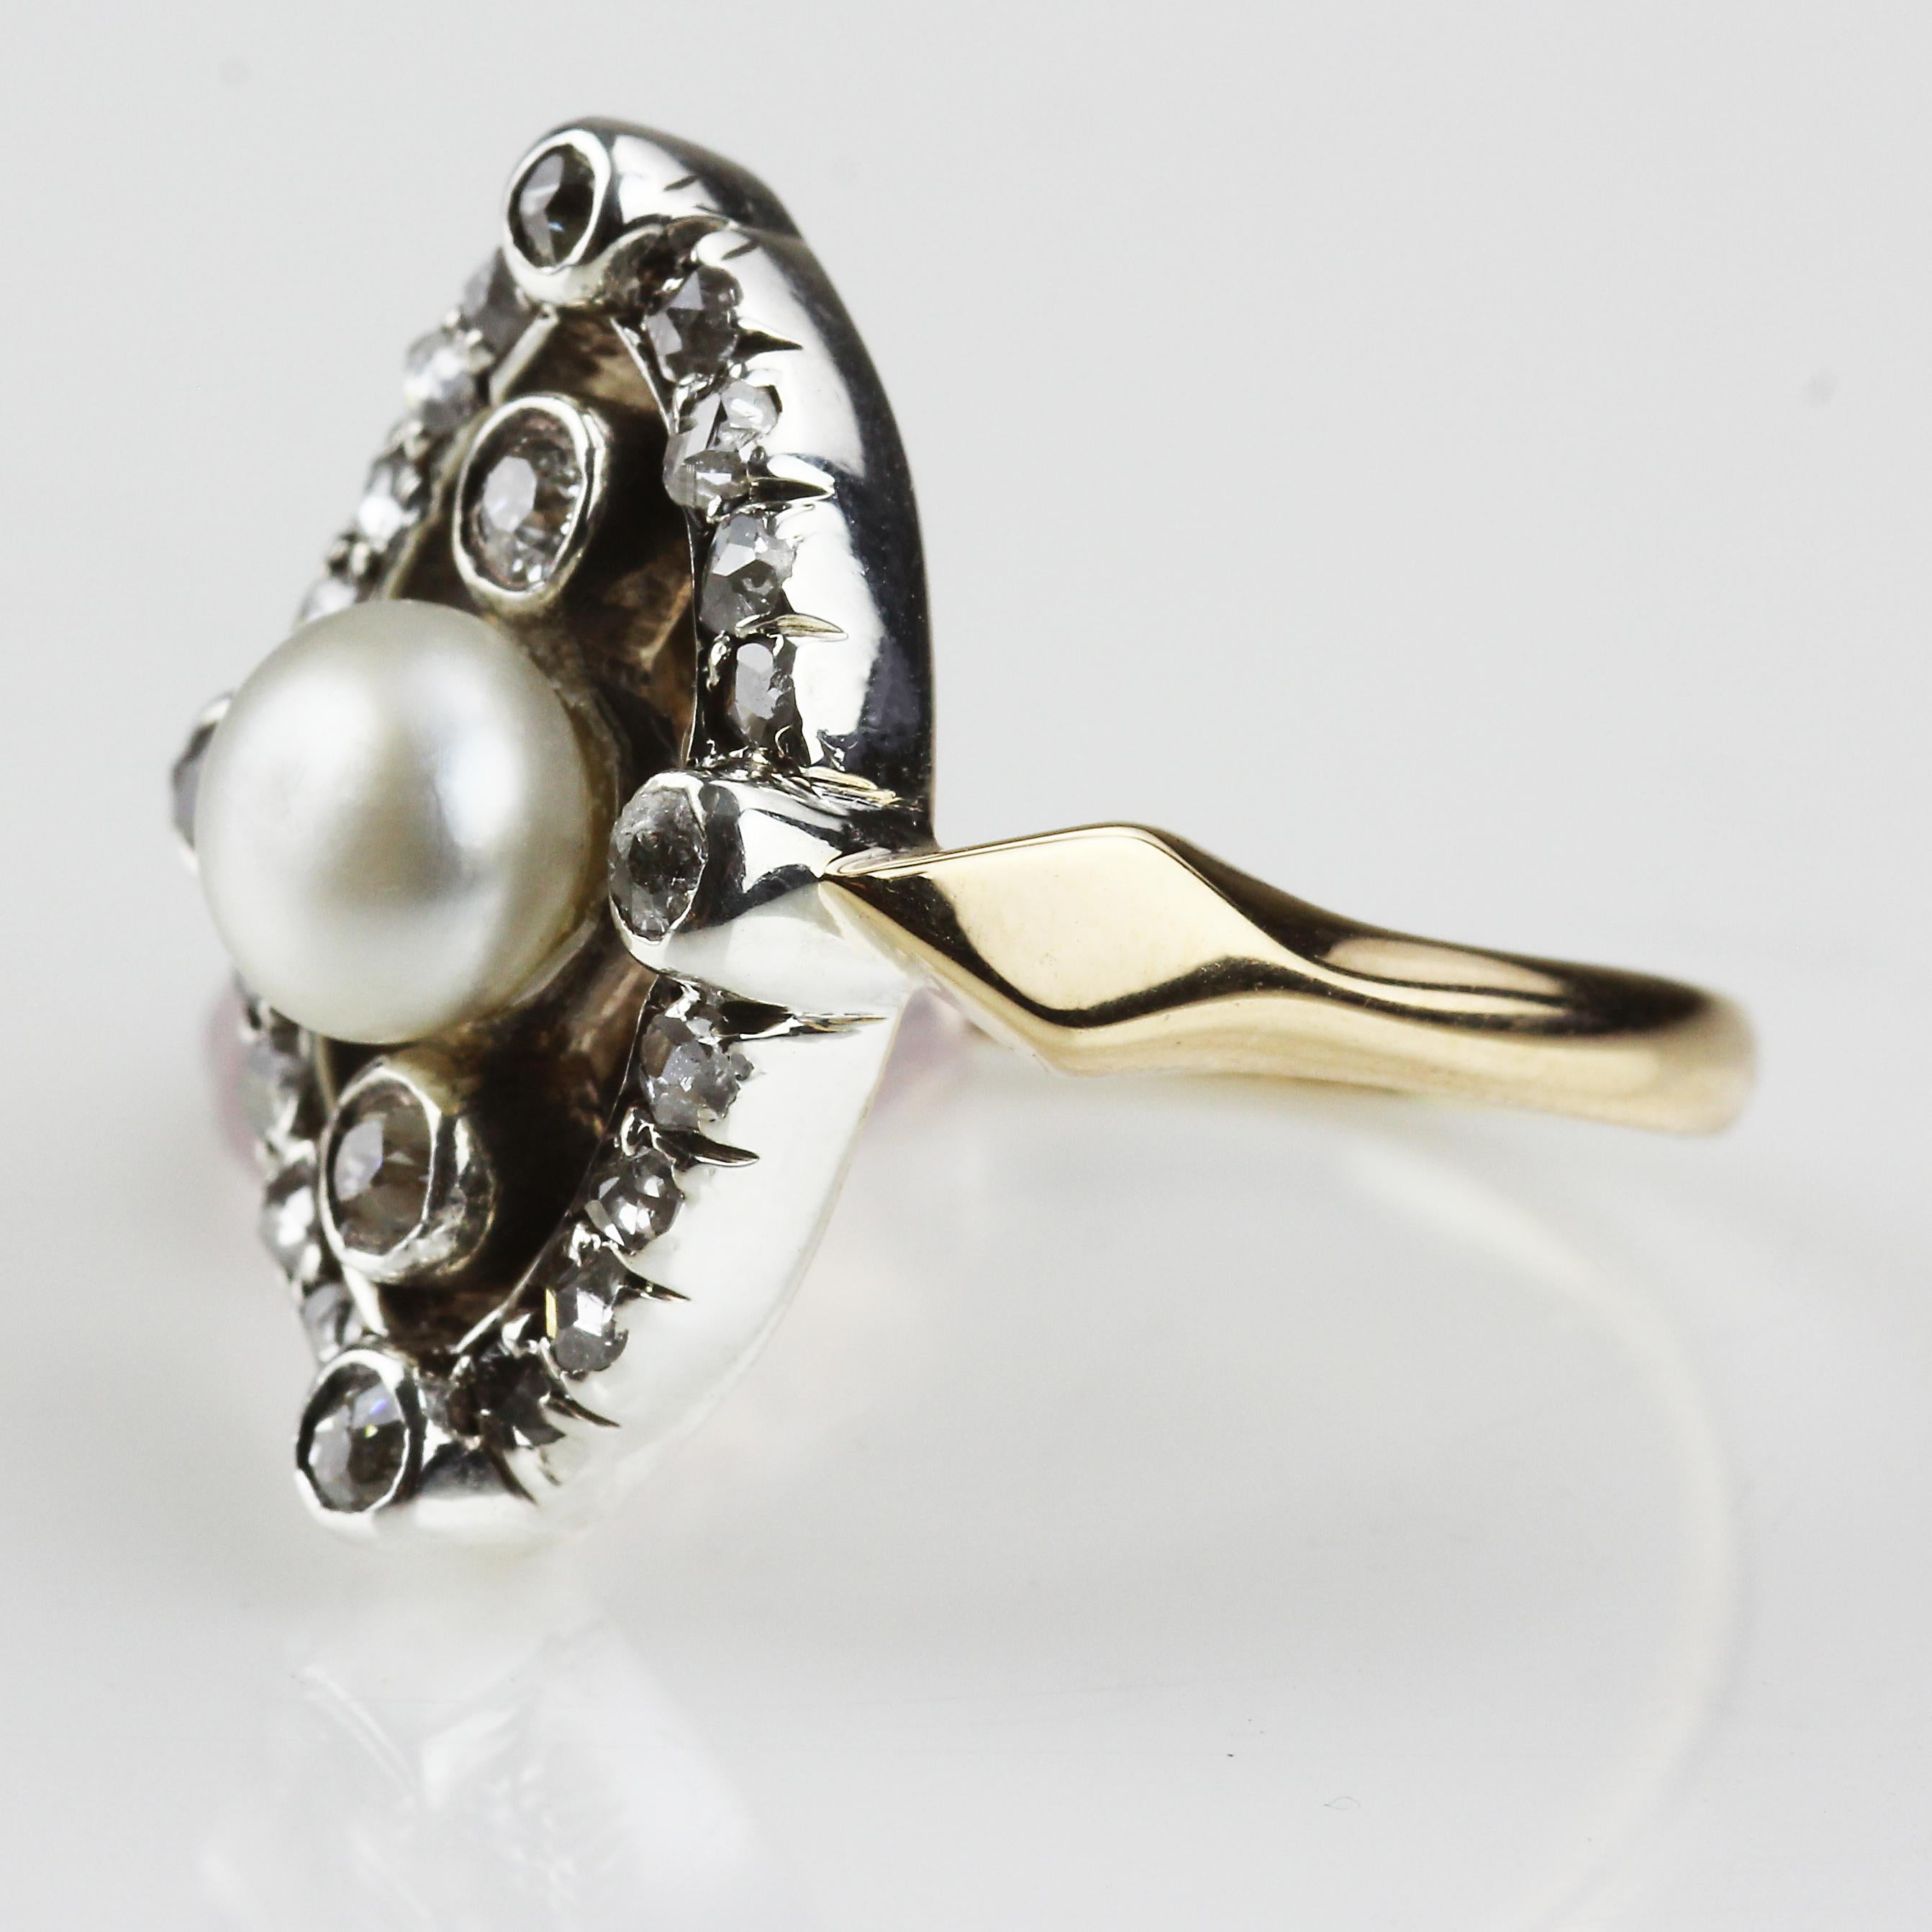 Antique Victorian natural pearl center with old European and rose cut diamonds ring. Set in 18 karat yellow gold mount with silver setting for the diamonds, classic Victorian style setting. 
UK ring size 